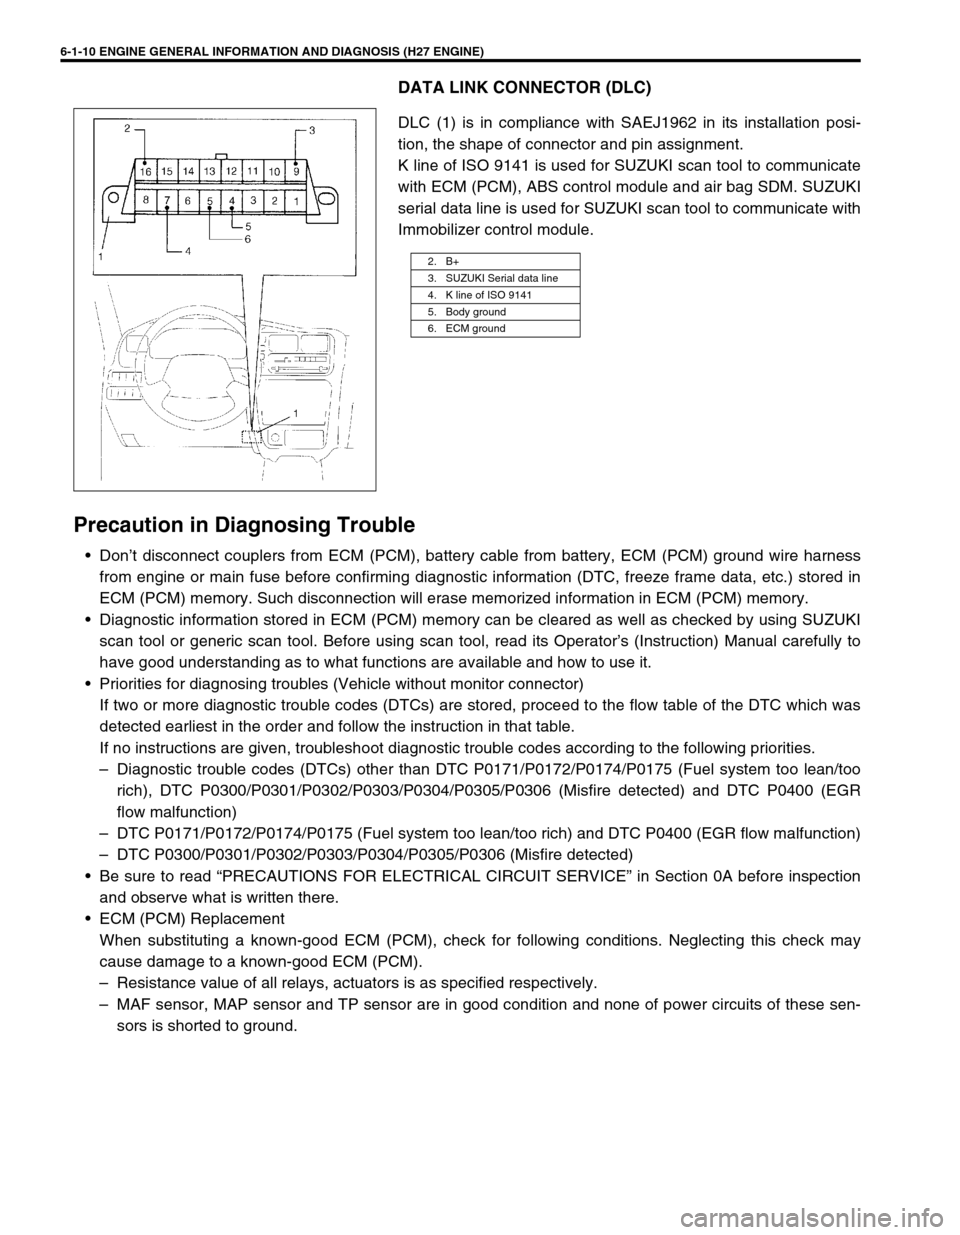 SUZUKI GRAND VITARA 1999 2.G User Guide 6-1-10 ENGINE GENERAL INFORMATION AND DIAGNOSIS (H27 ENGINE)
DATA LINK CONNECTOR (DLC)
DLC (1) is in compliance with SAEJ1962 in its installation posi-
tion, the shape of connector and pin assignment.